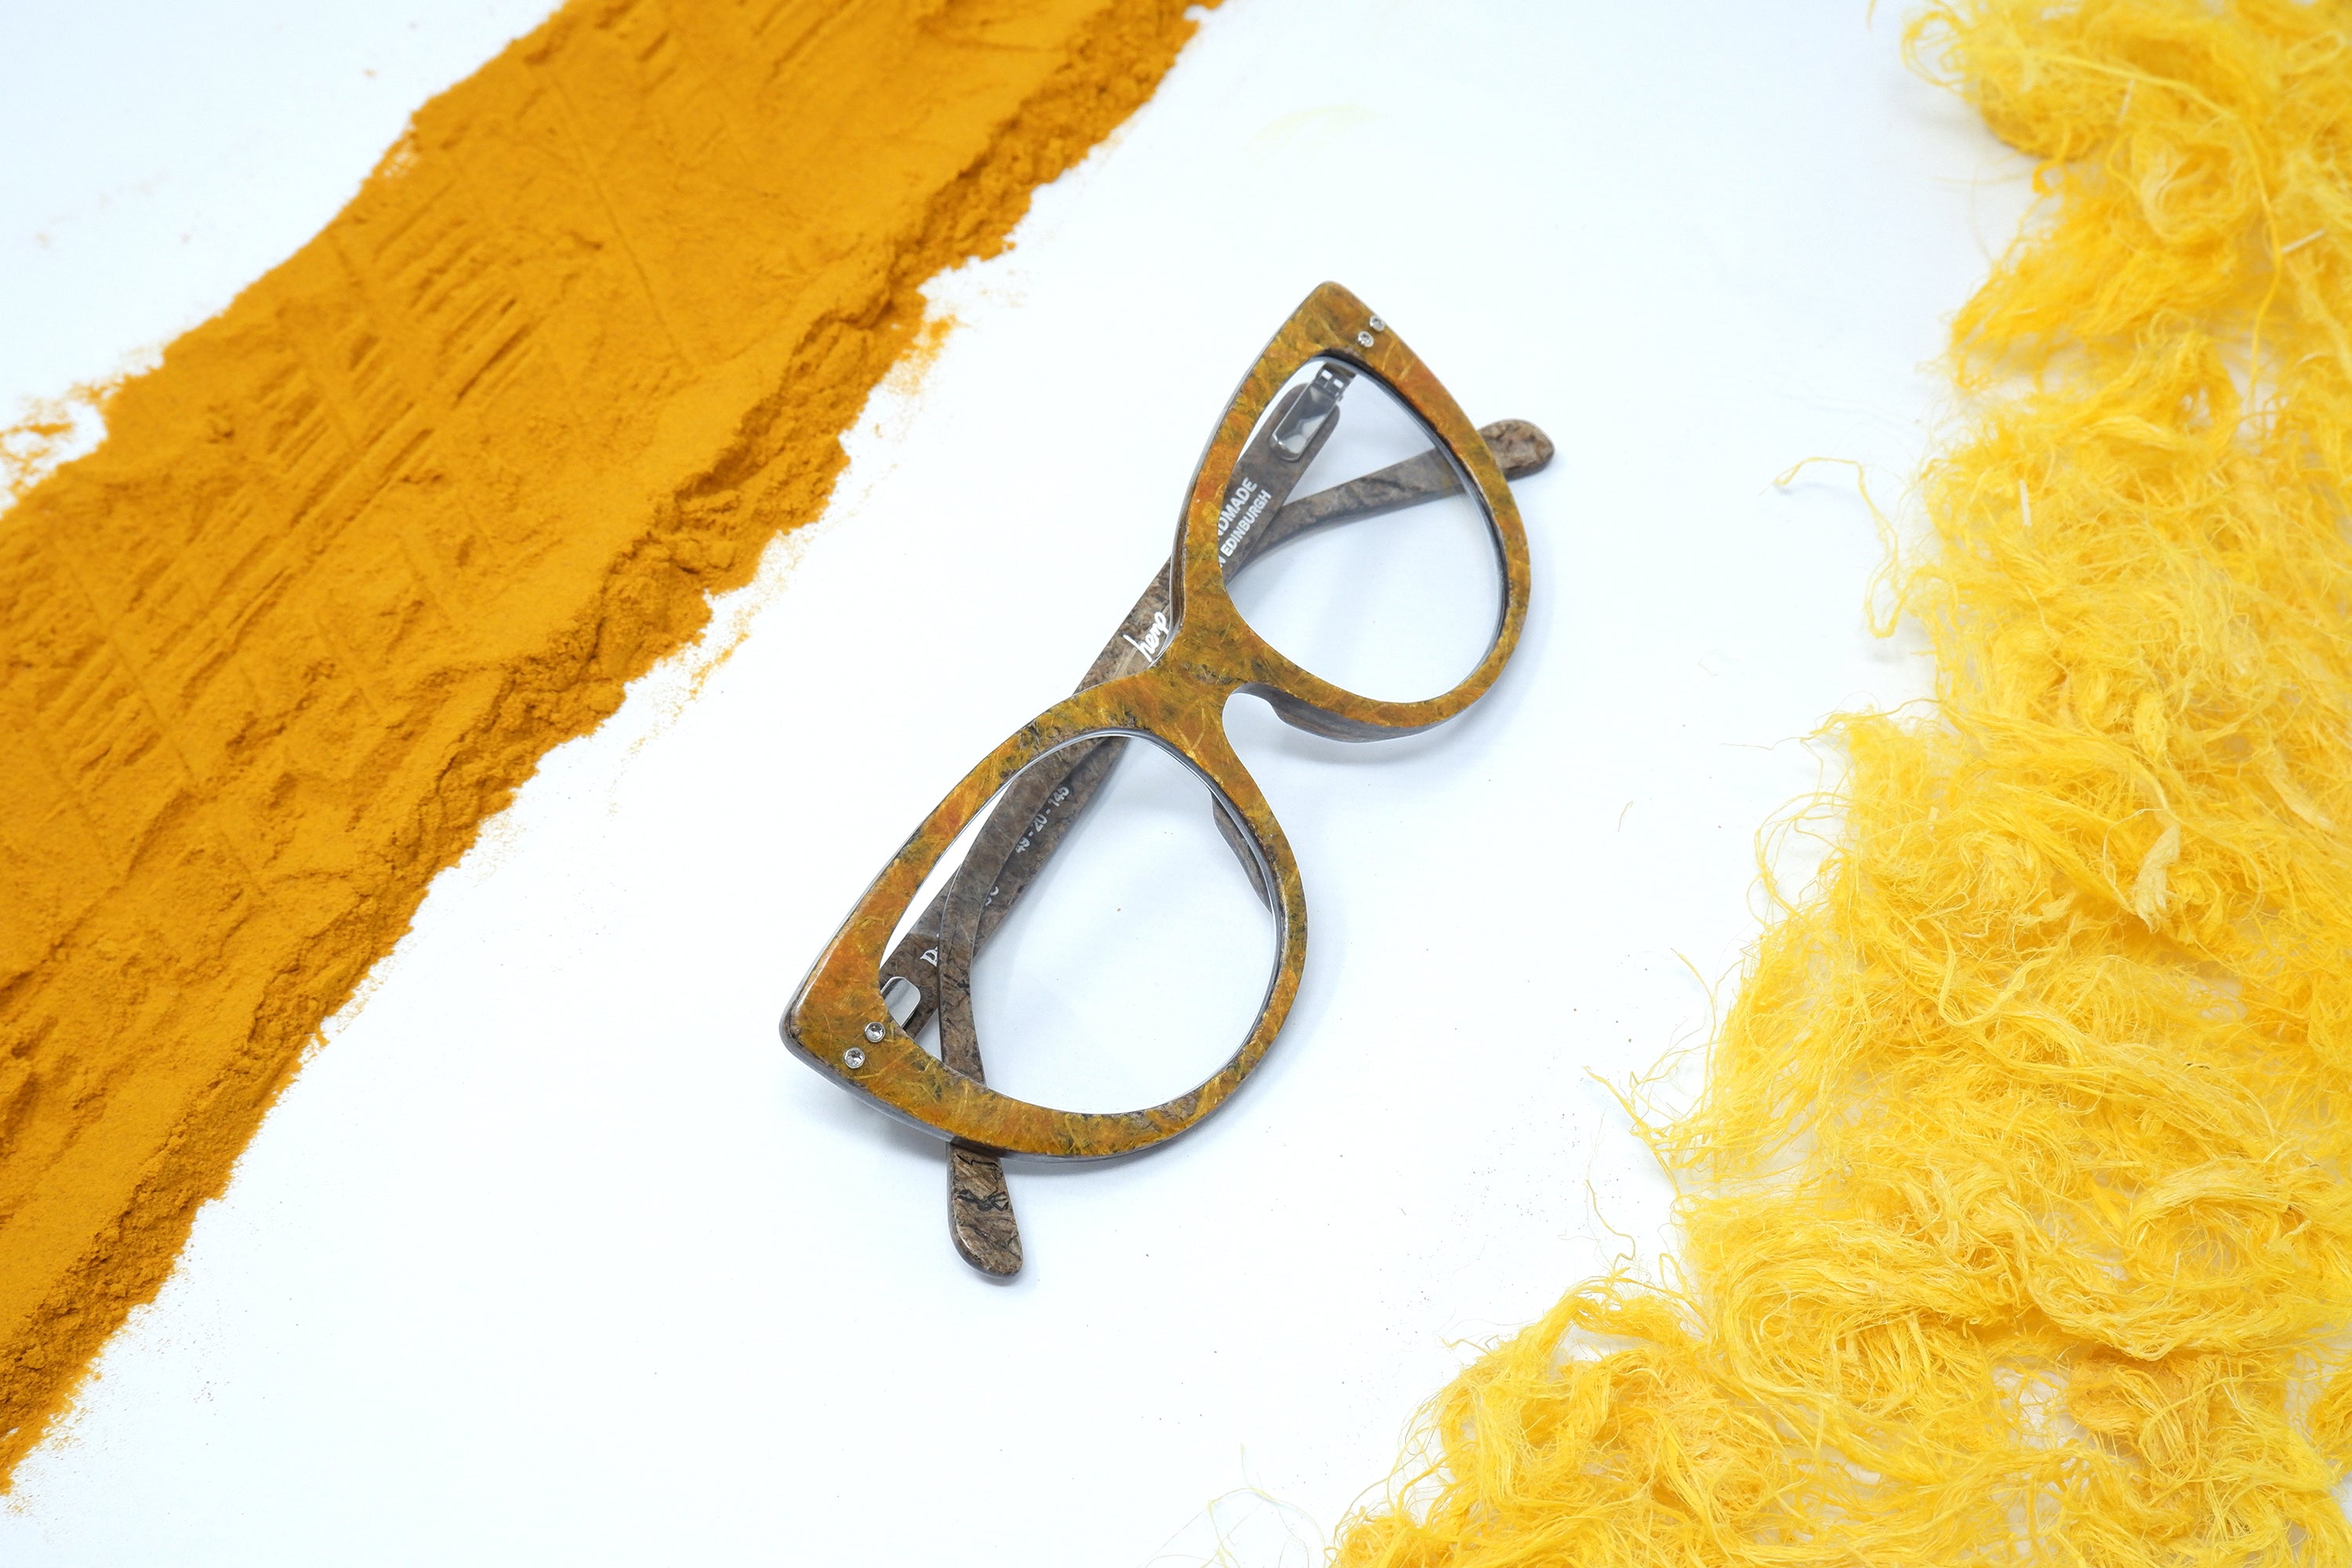 How it's made: The Turmeric frame